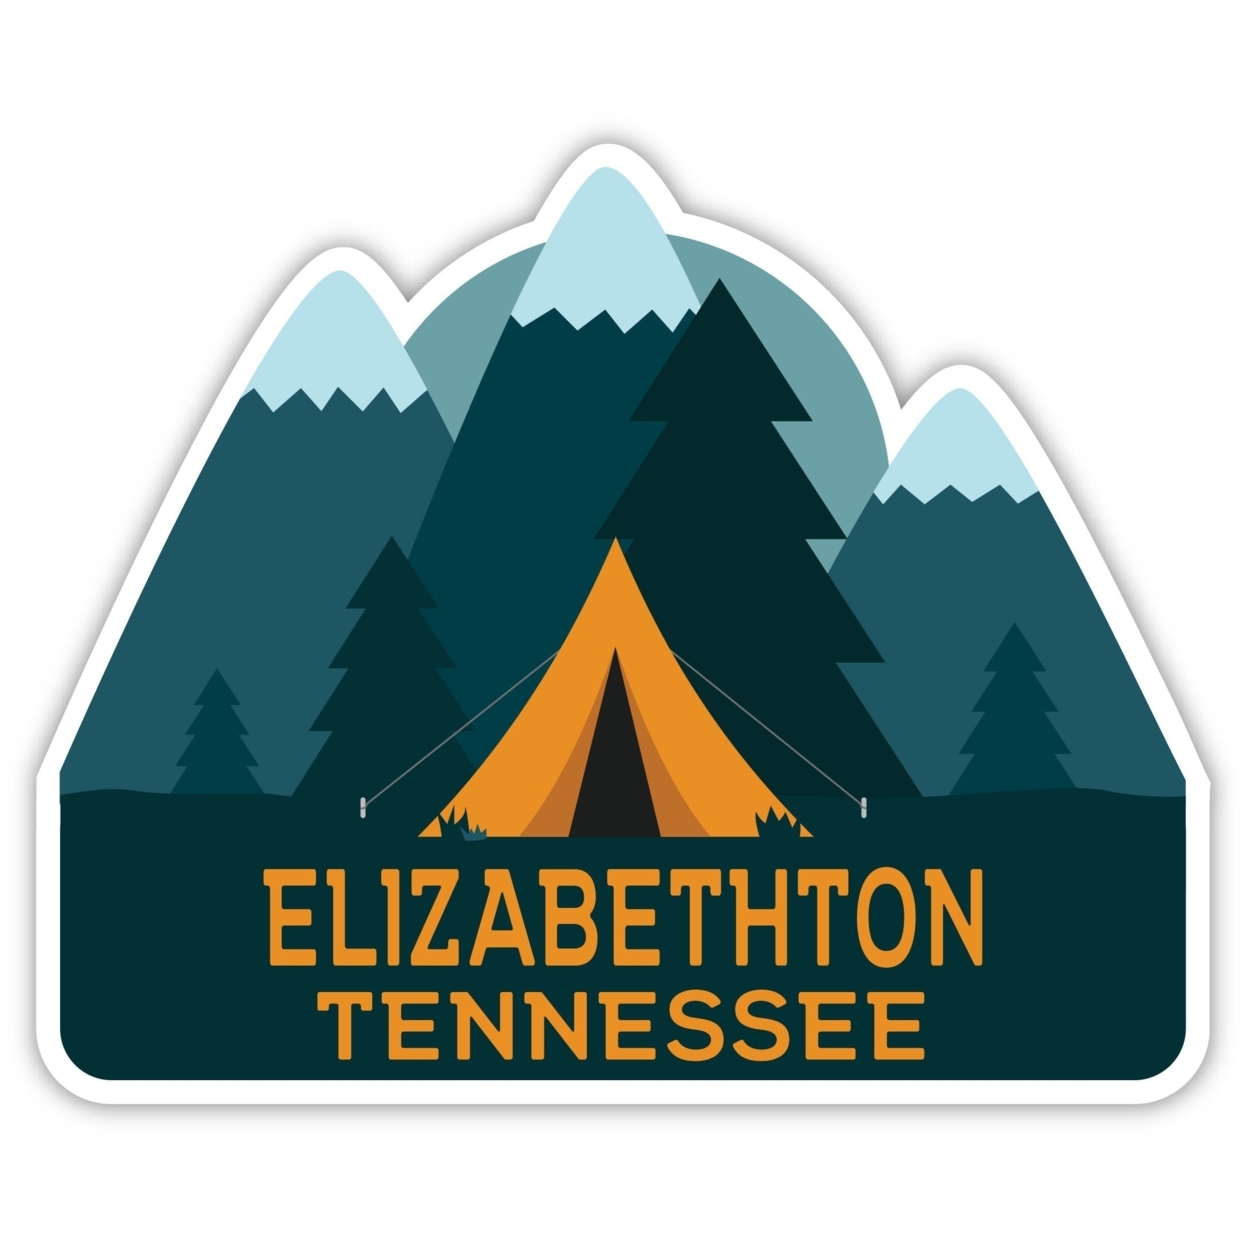 Elizabethton Tennessee Souvenir Decorative Stickers (Choose Theme And Size) - 4-Pack, 6-Inch, Tent